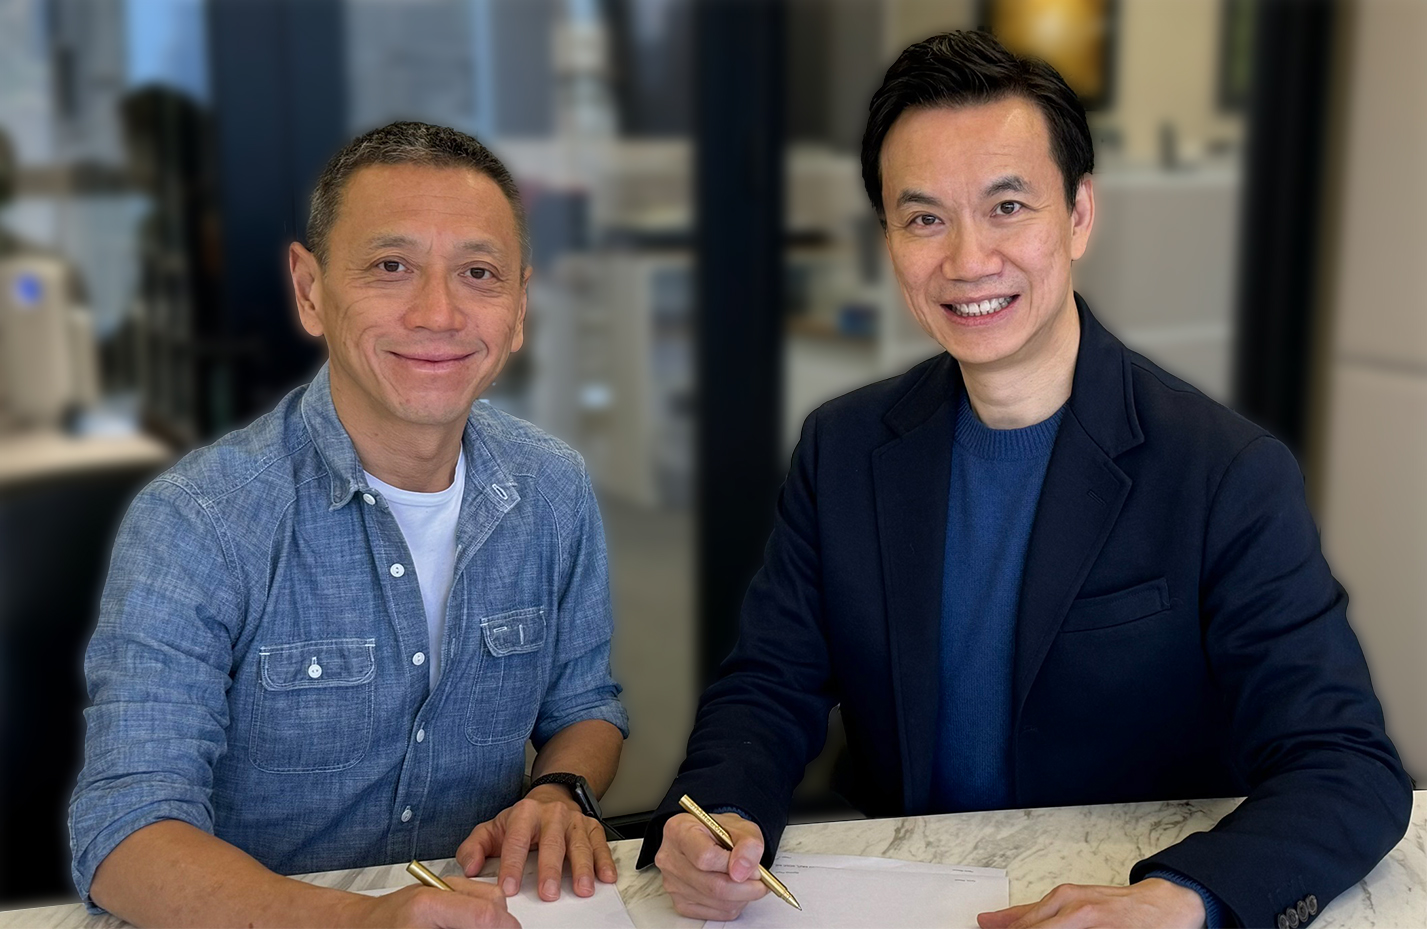 Black Spade and founder of dragon-i Gilbert Yeung sign MOU to join forces to revolutionise entertainment